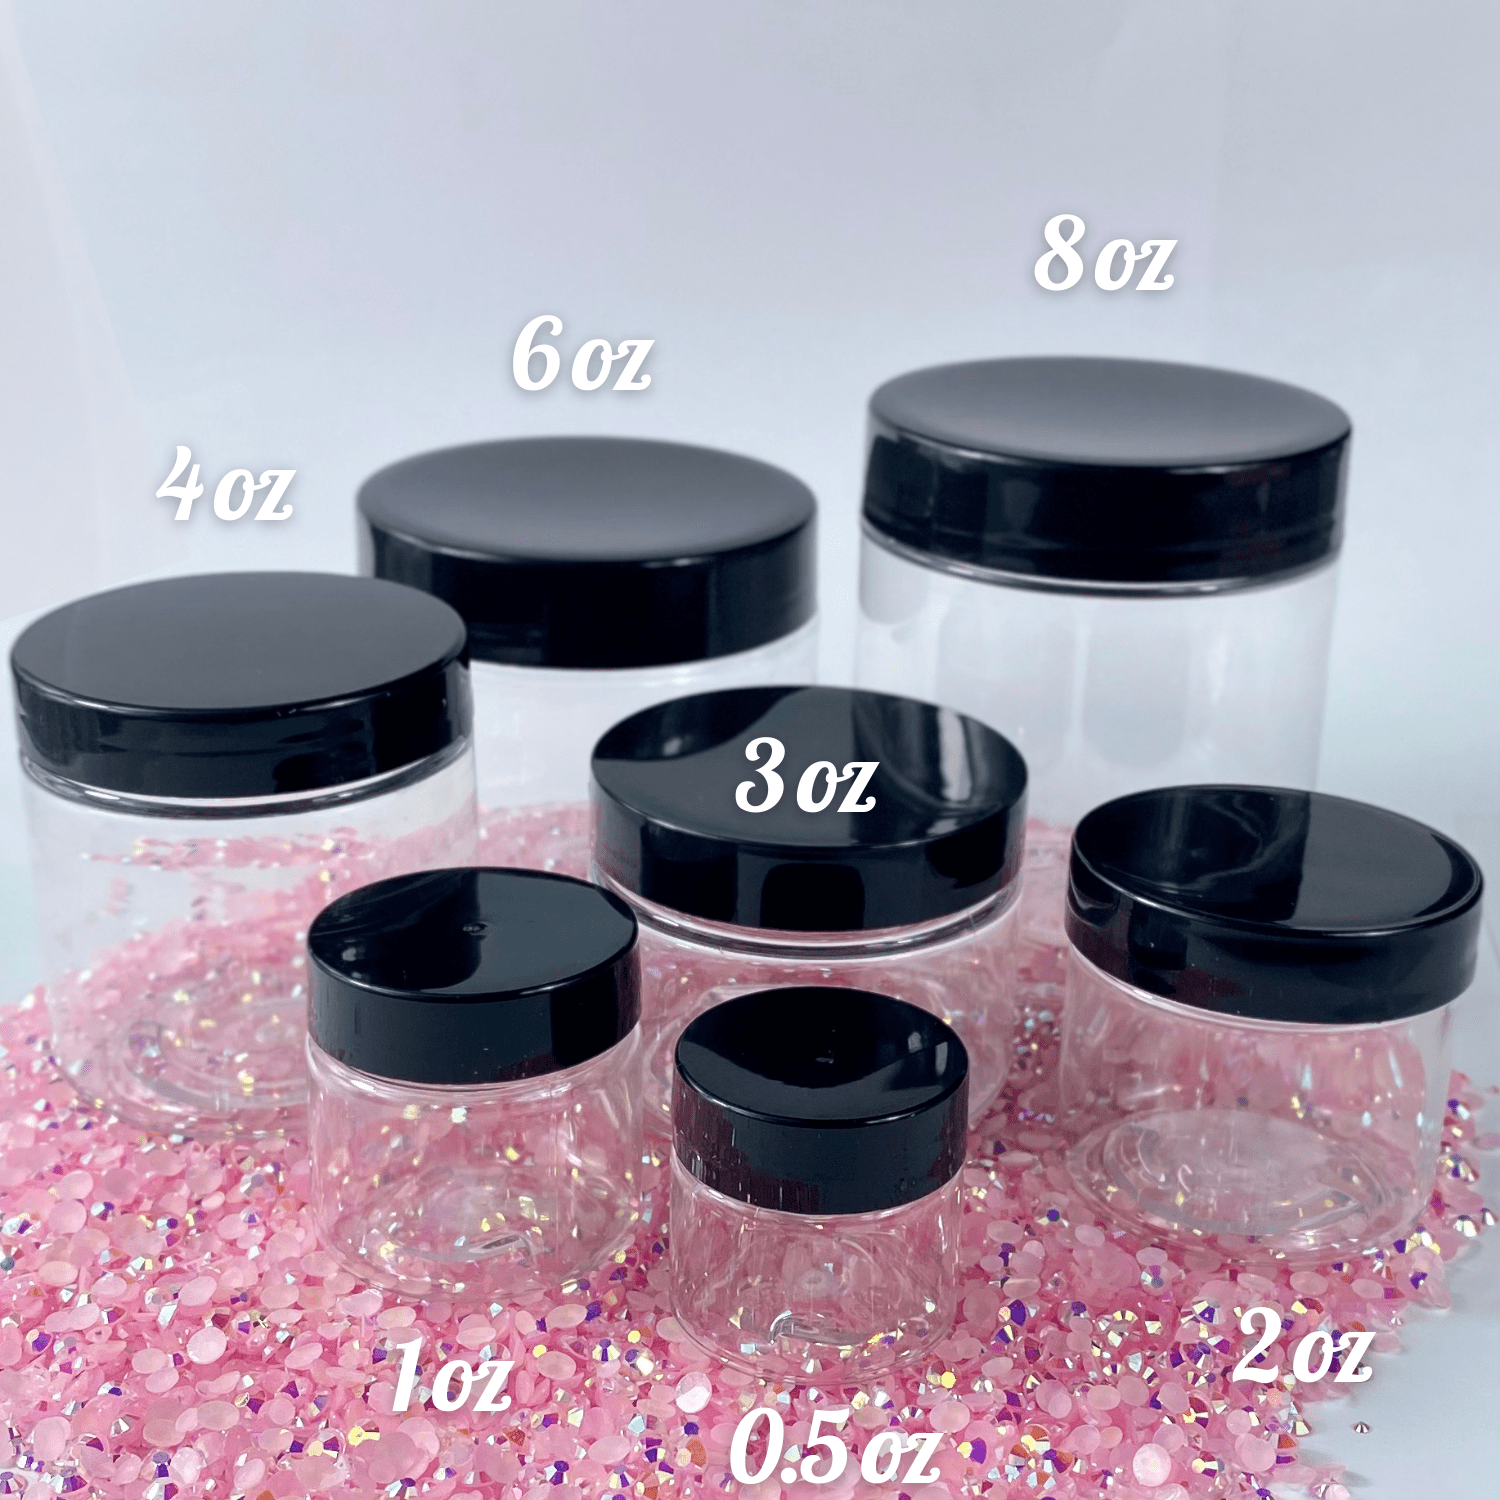 STORAGE Jar CONTAINERS Clear Polystyrene Wide Mouth Containers